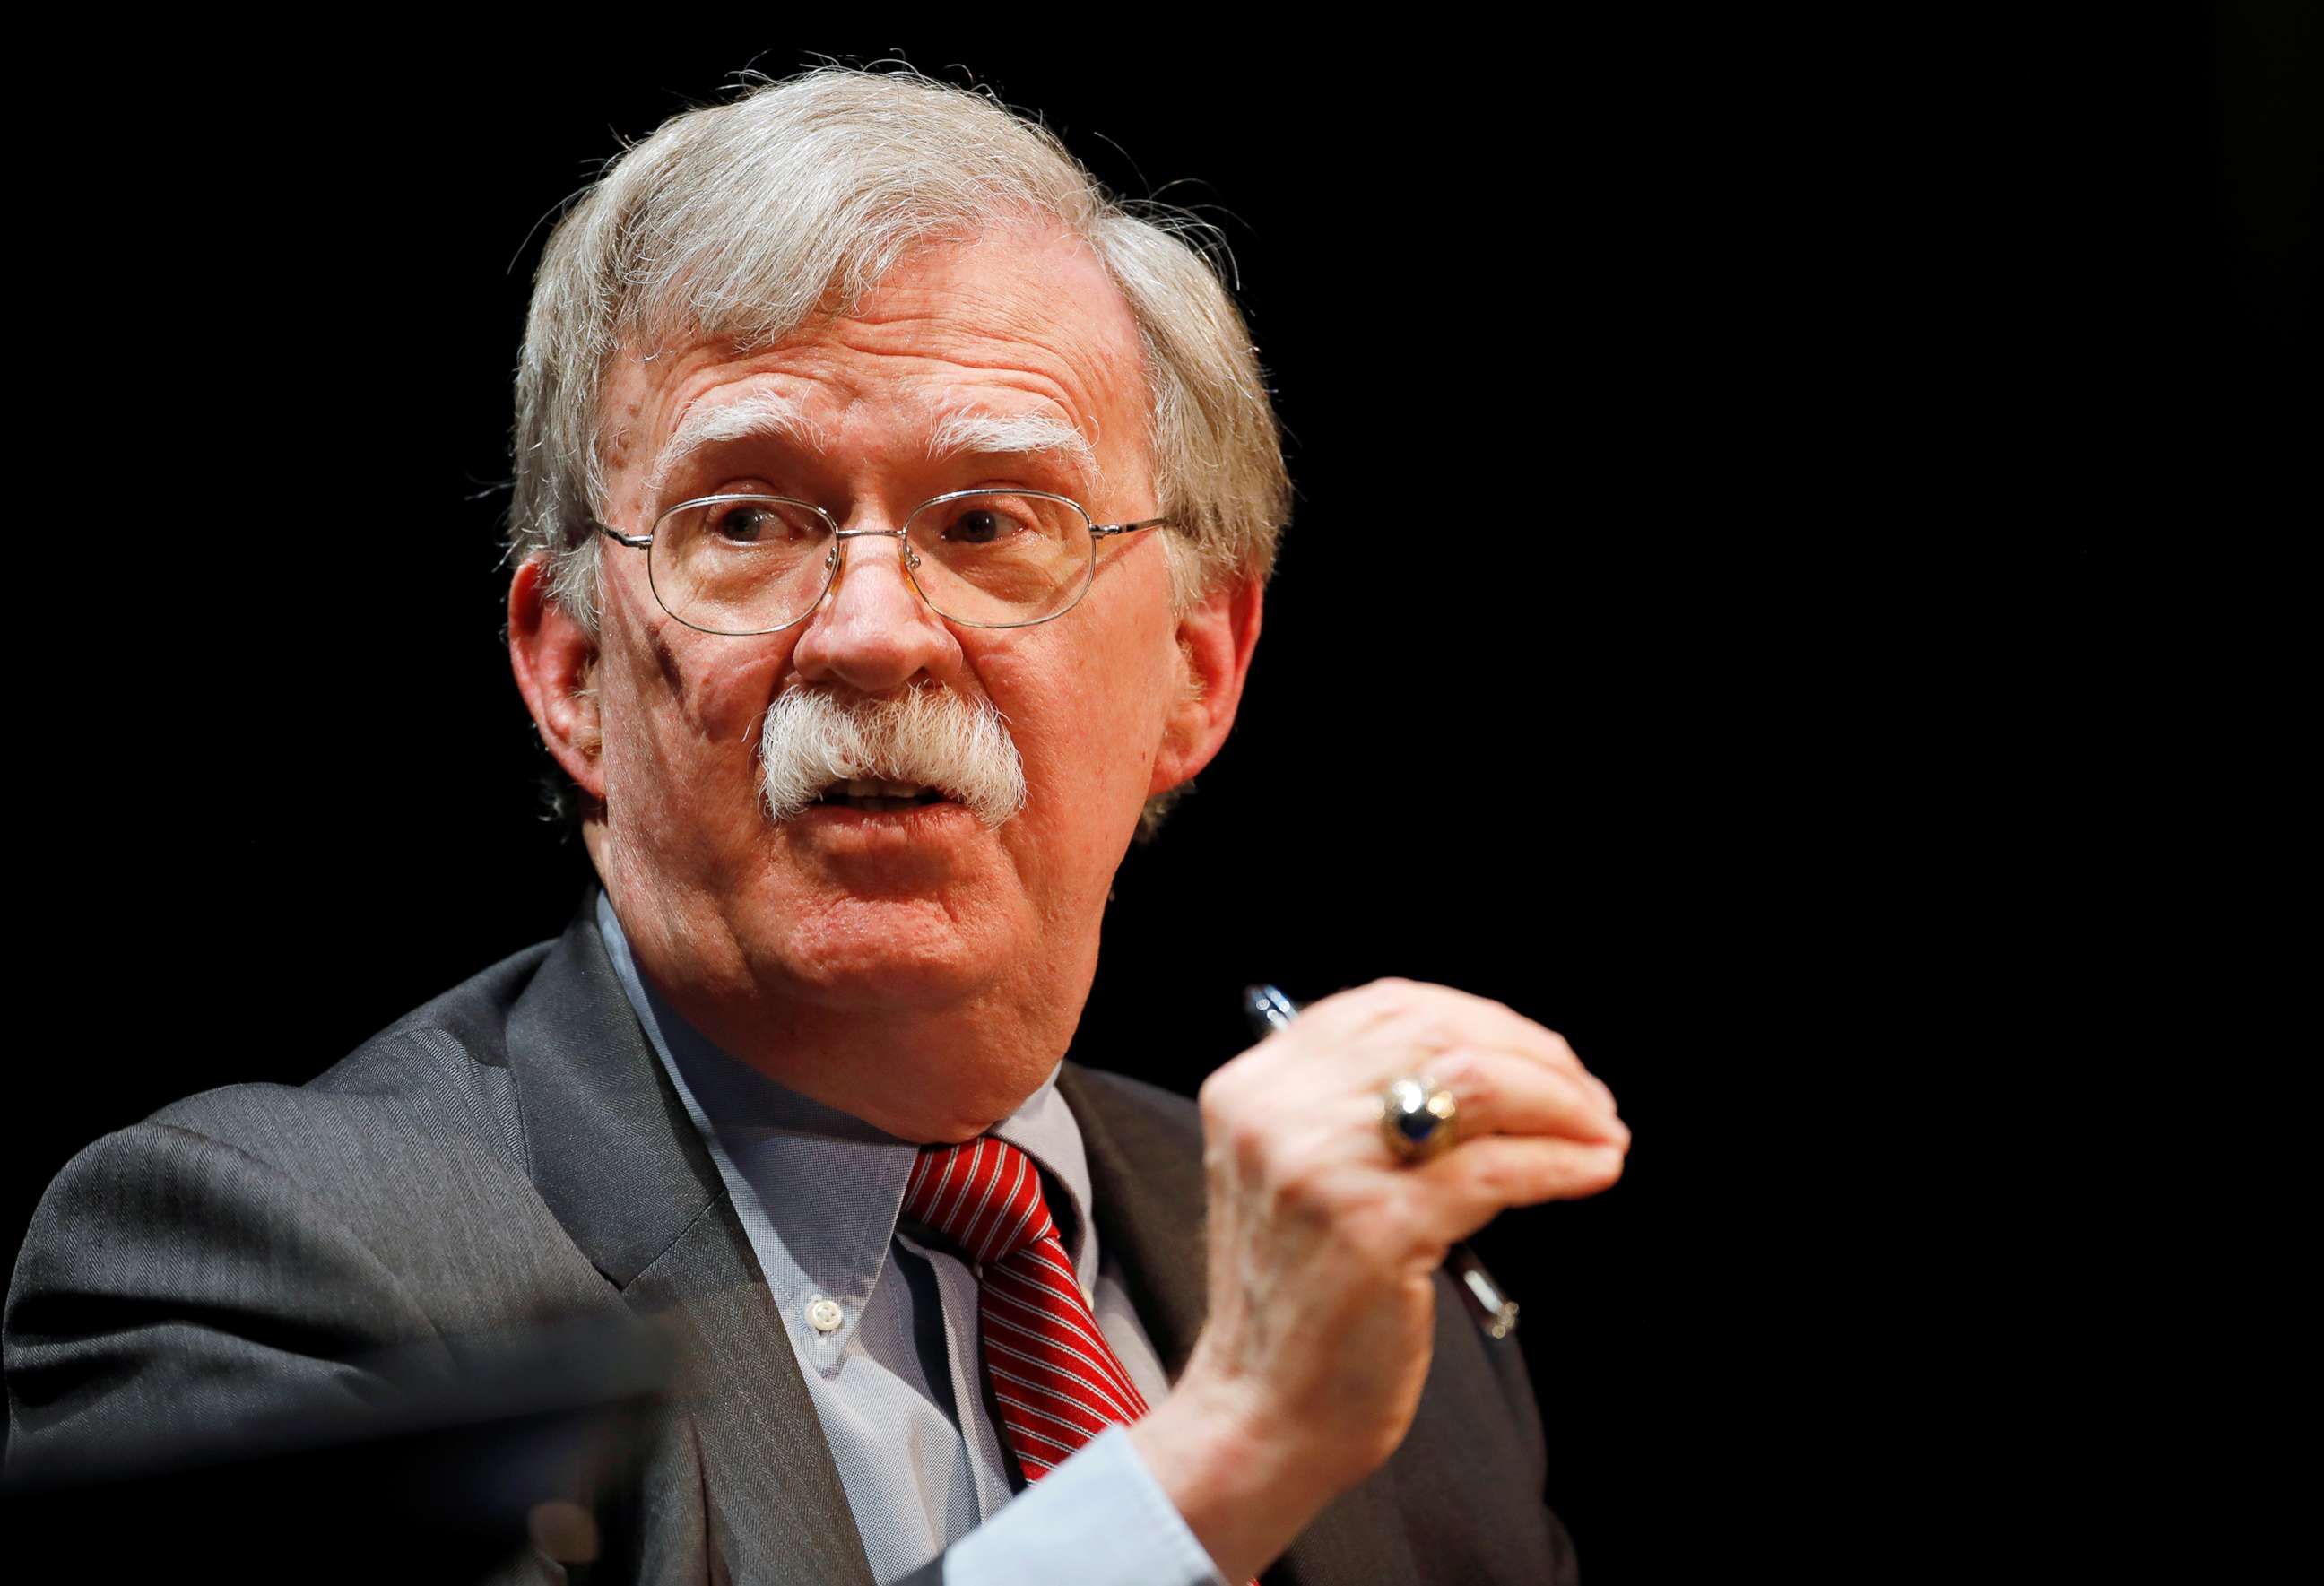 PHOTO: Former U.S. national security advisor John Bolton speaks during his lecture at Duke University in Durham, NC., Feb. 17, 2020.